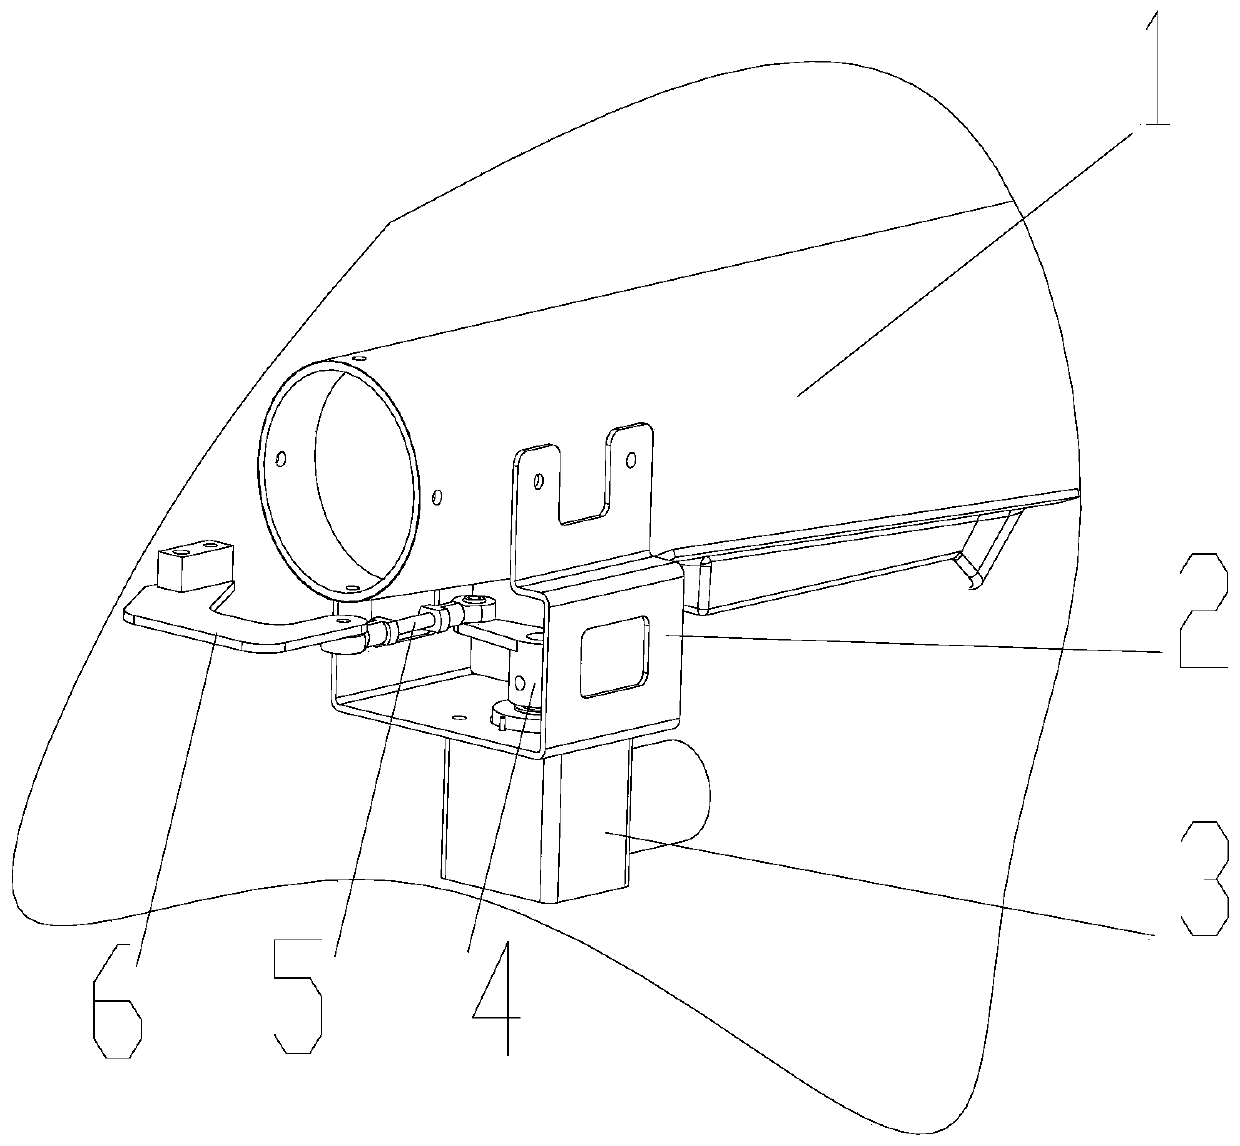 Tail vane refitting structure for refitting manned helicopter into aviation fire extinguishing device